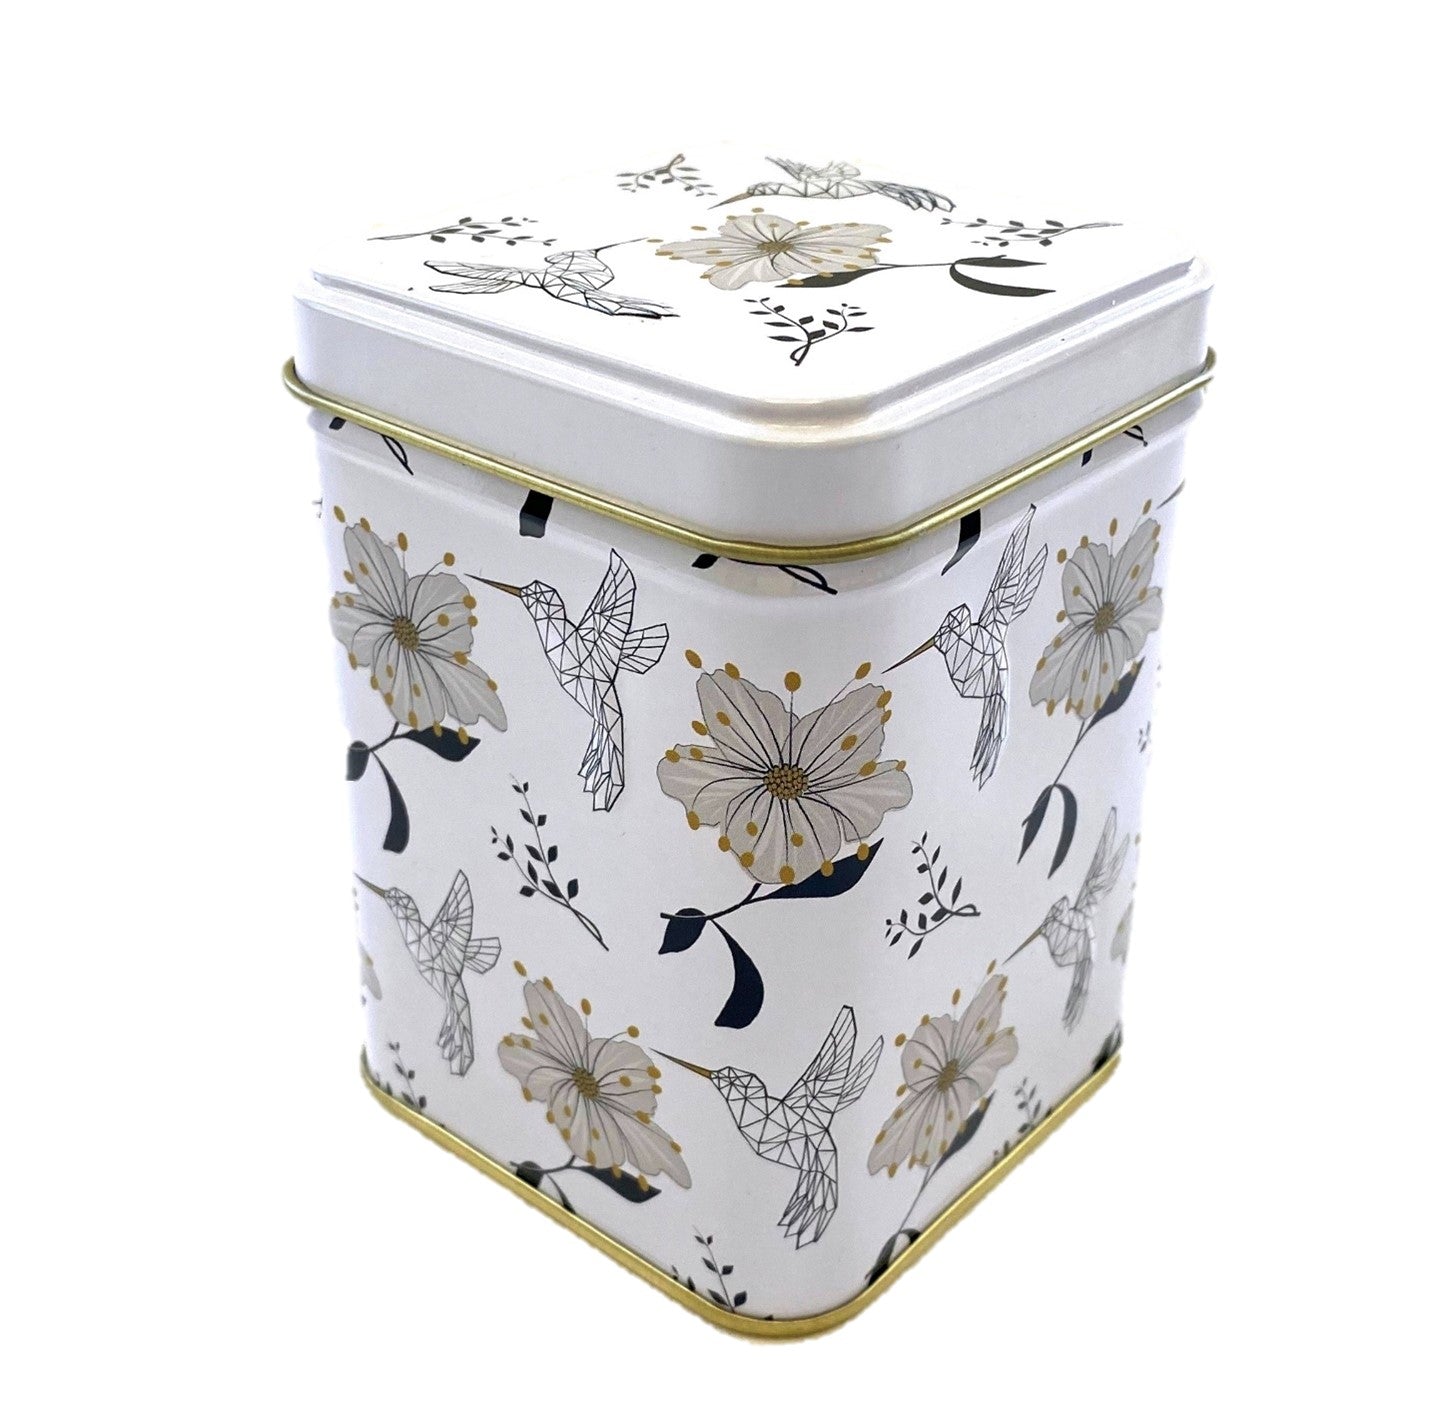 White canister with pictures of doves and white flowers